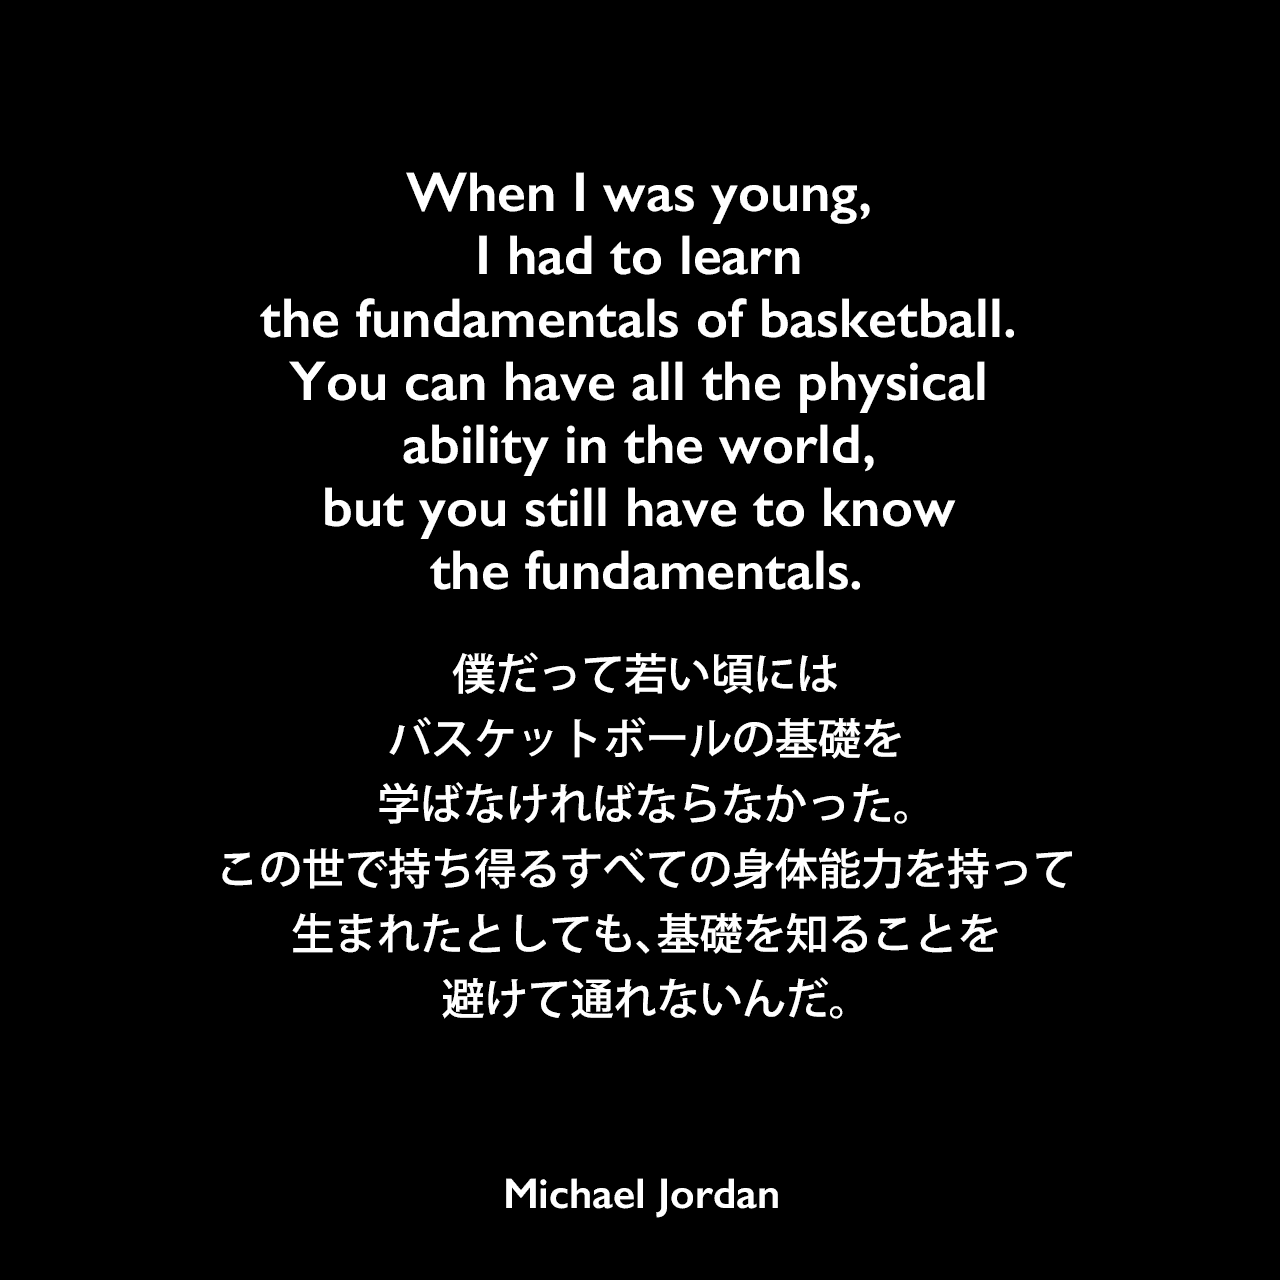 When I was young, I had to learn the fundamentals of basketball. You can have all the physical ability in the world, but you still have to know the fundamentals.僕だって若い頃には、バスケットボールの基礎を学ばなければならなかった。この世で持ち得るすべての身体能力を持って生まれたとしても、基礎を知ることを避けて通れないんだ。Michael Jordan